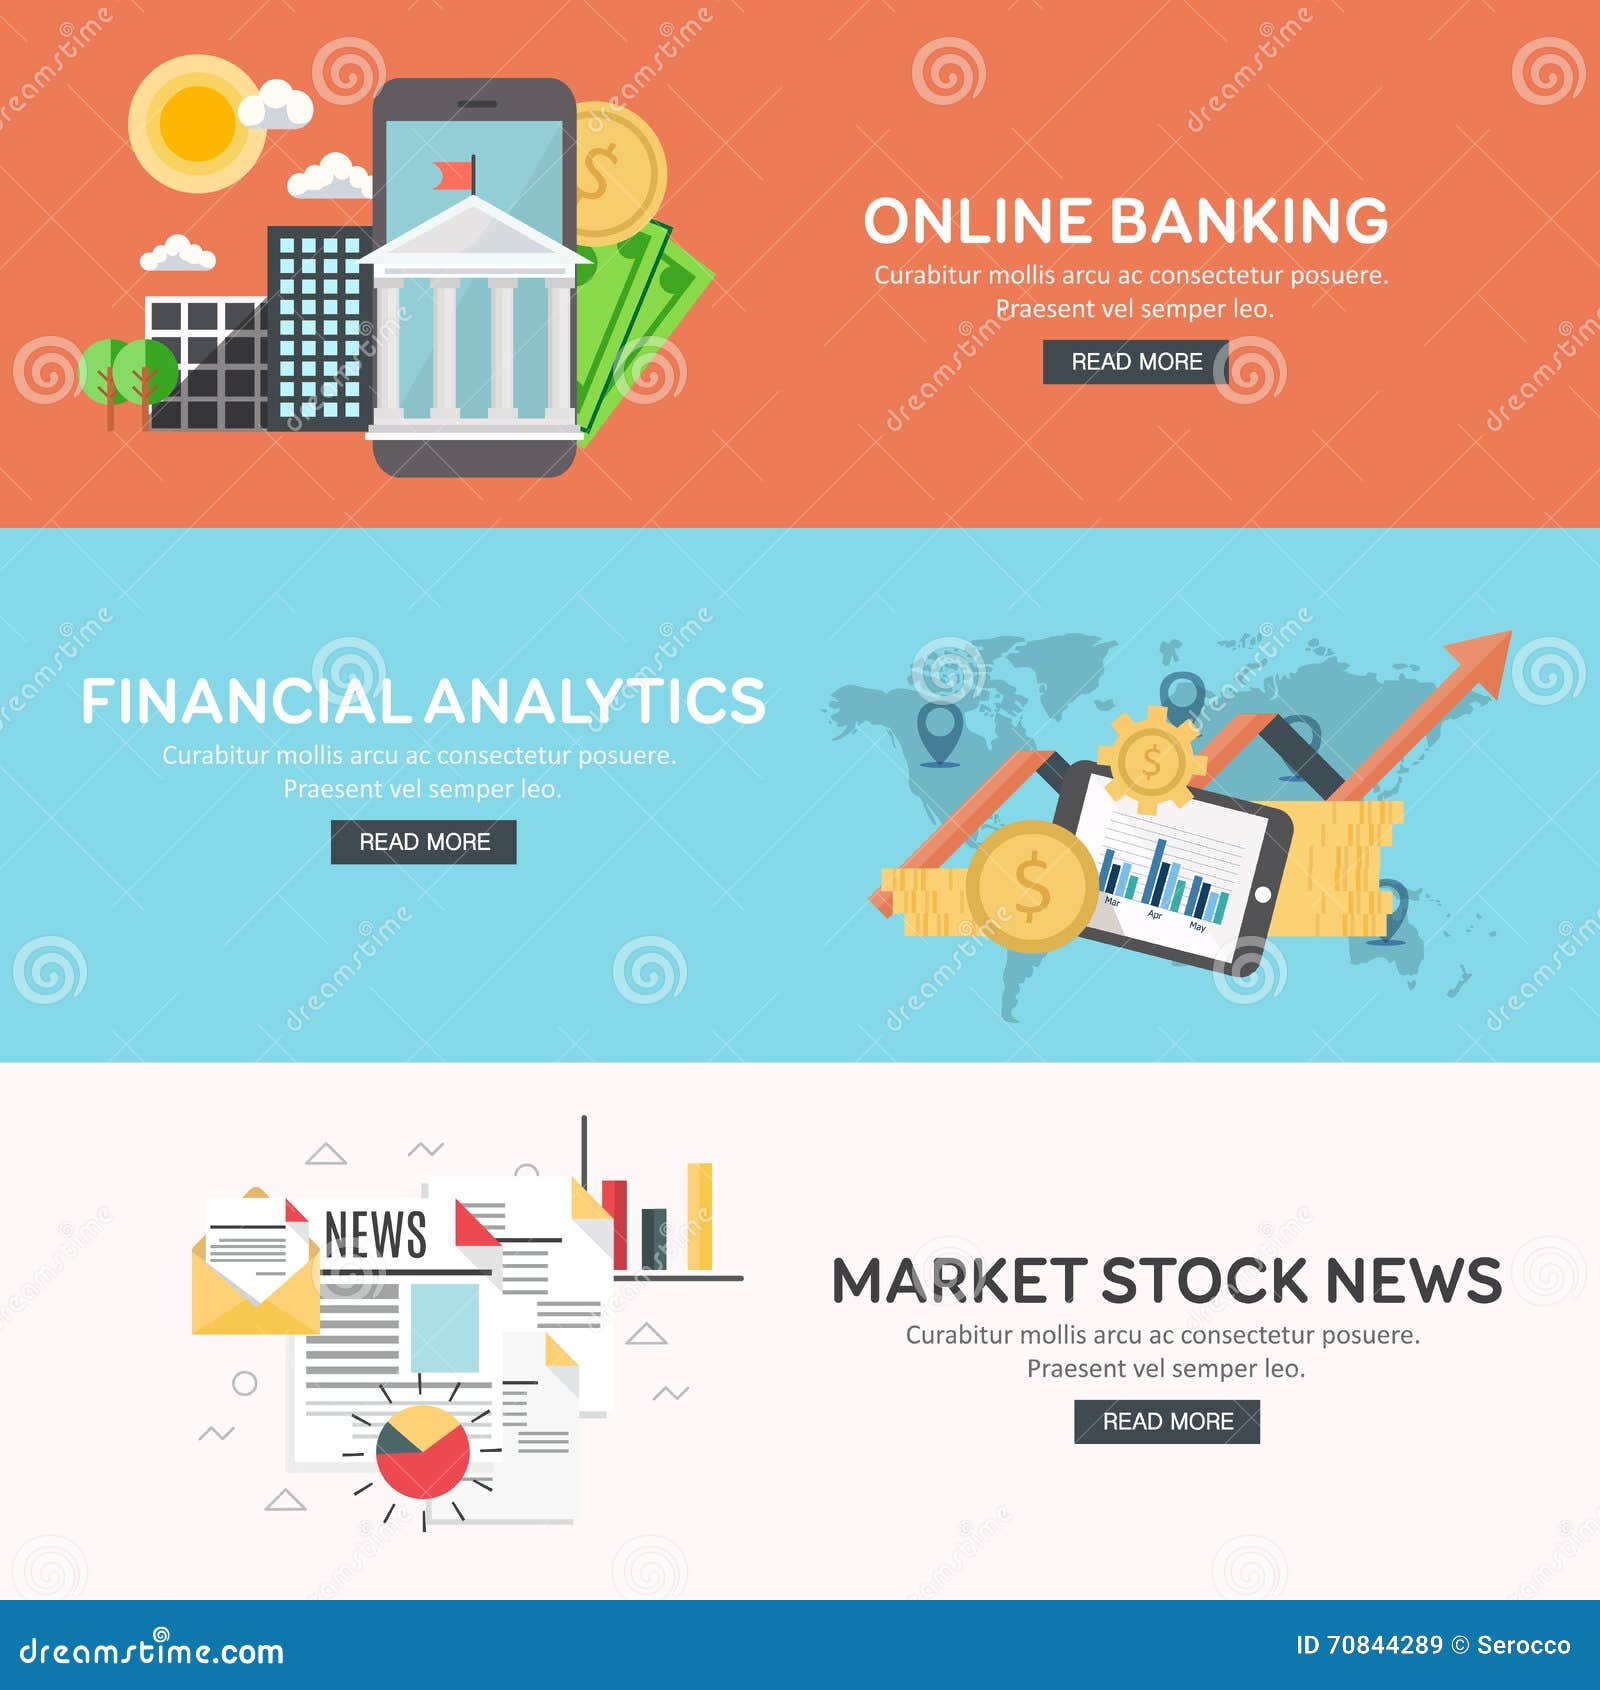 Online Banking Market Research Reports & Industry Analysis